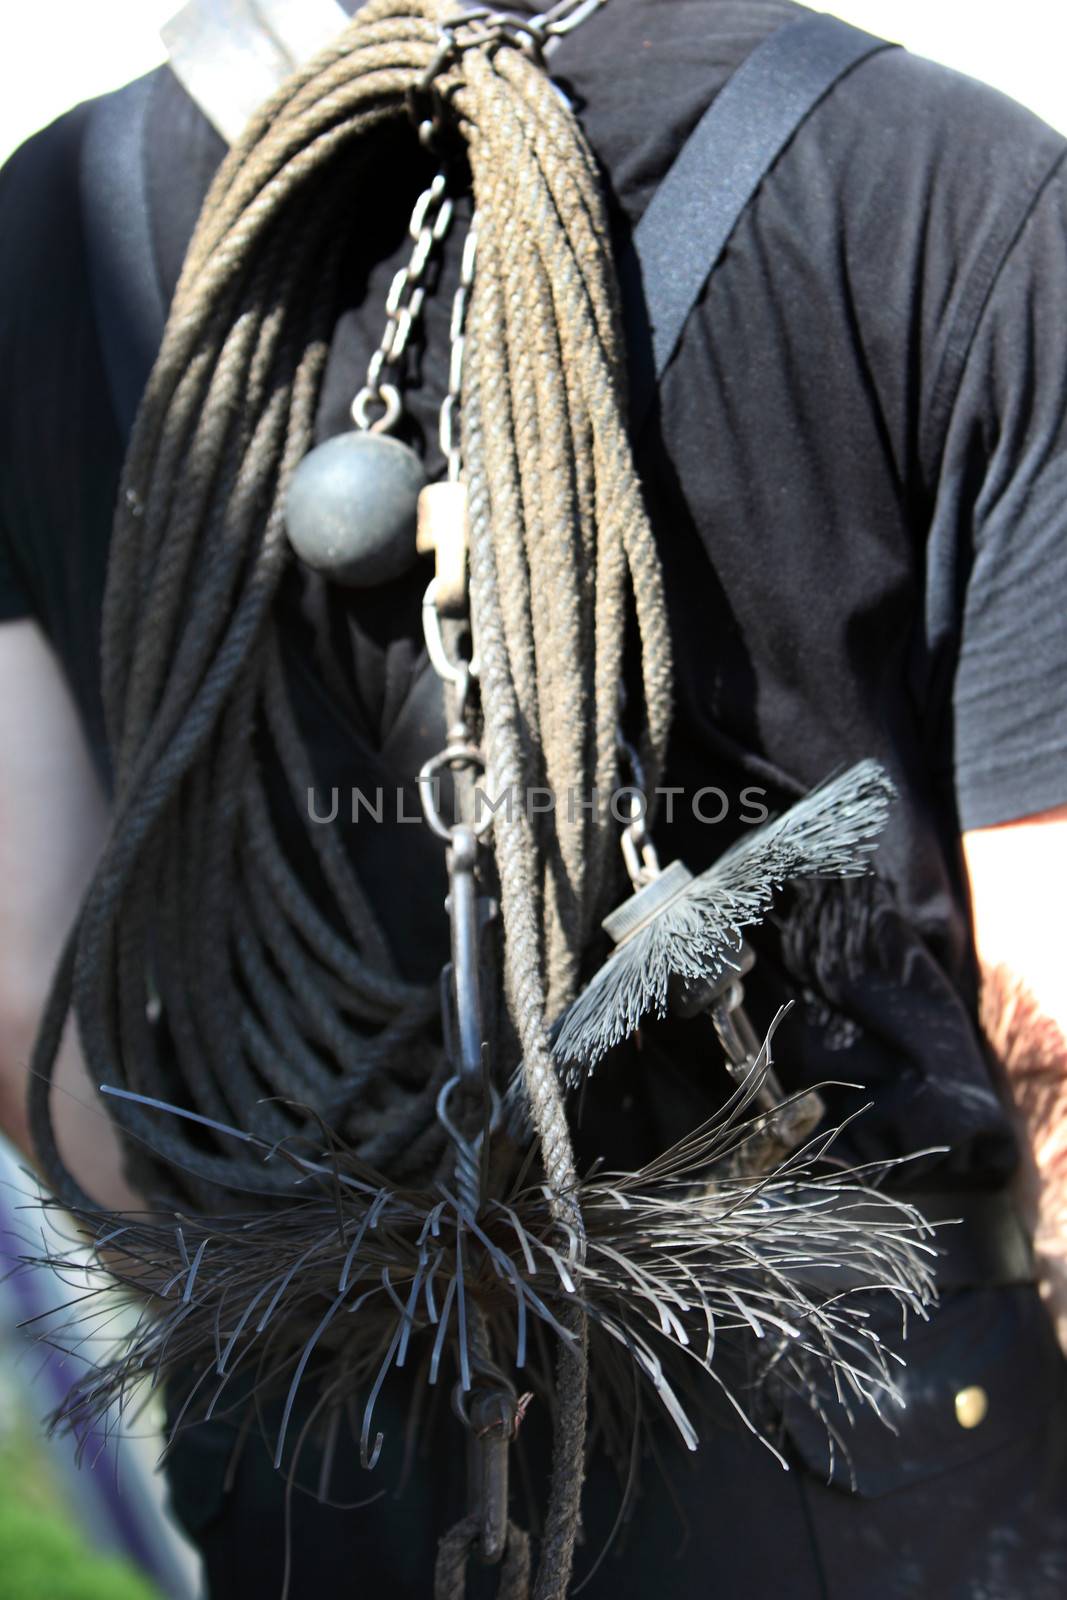 Weighted chain, rope and wire brush for cleaning chimneys being carried on the back of a chimney sweep